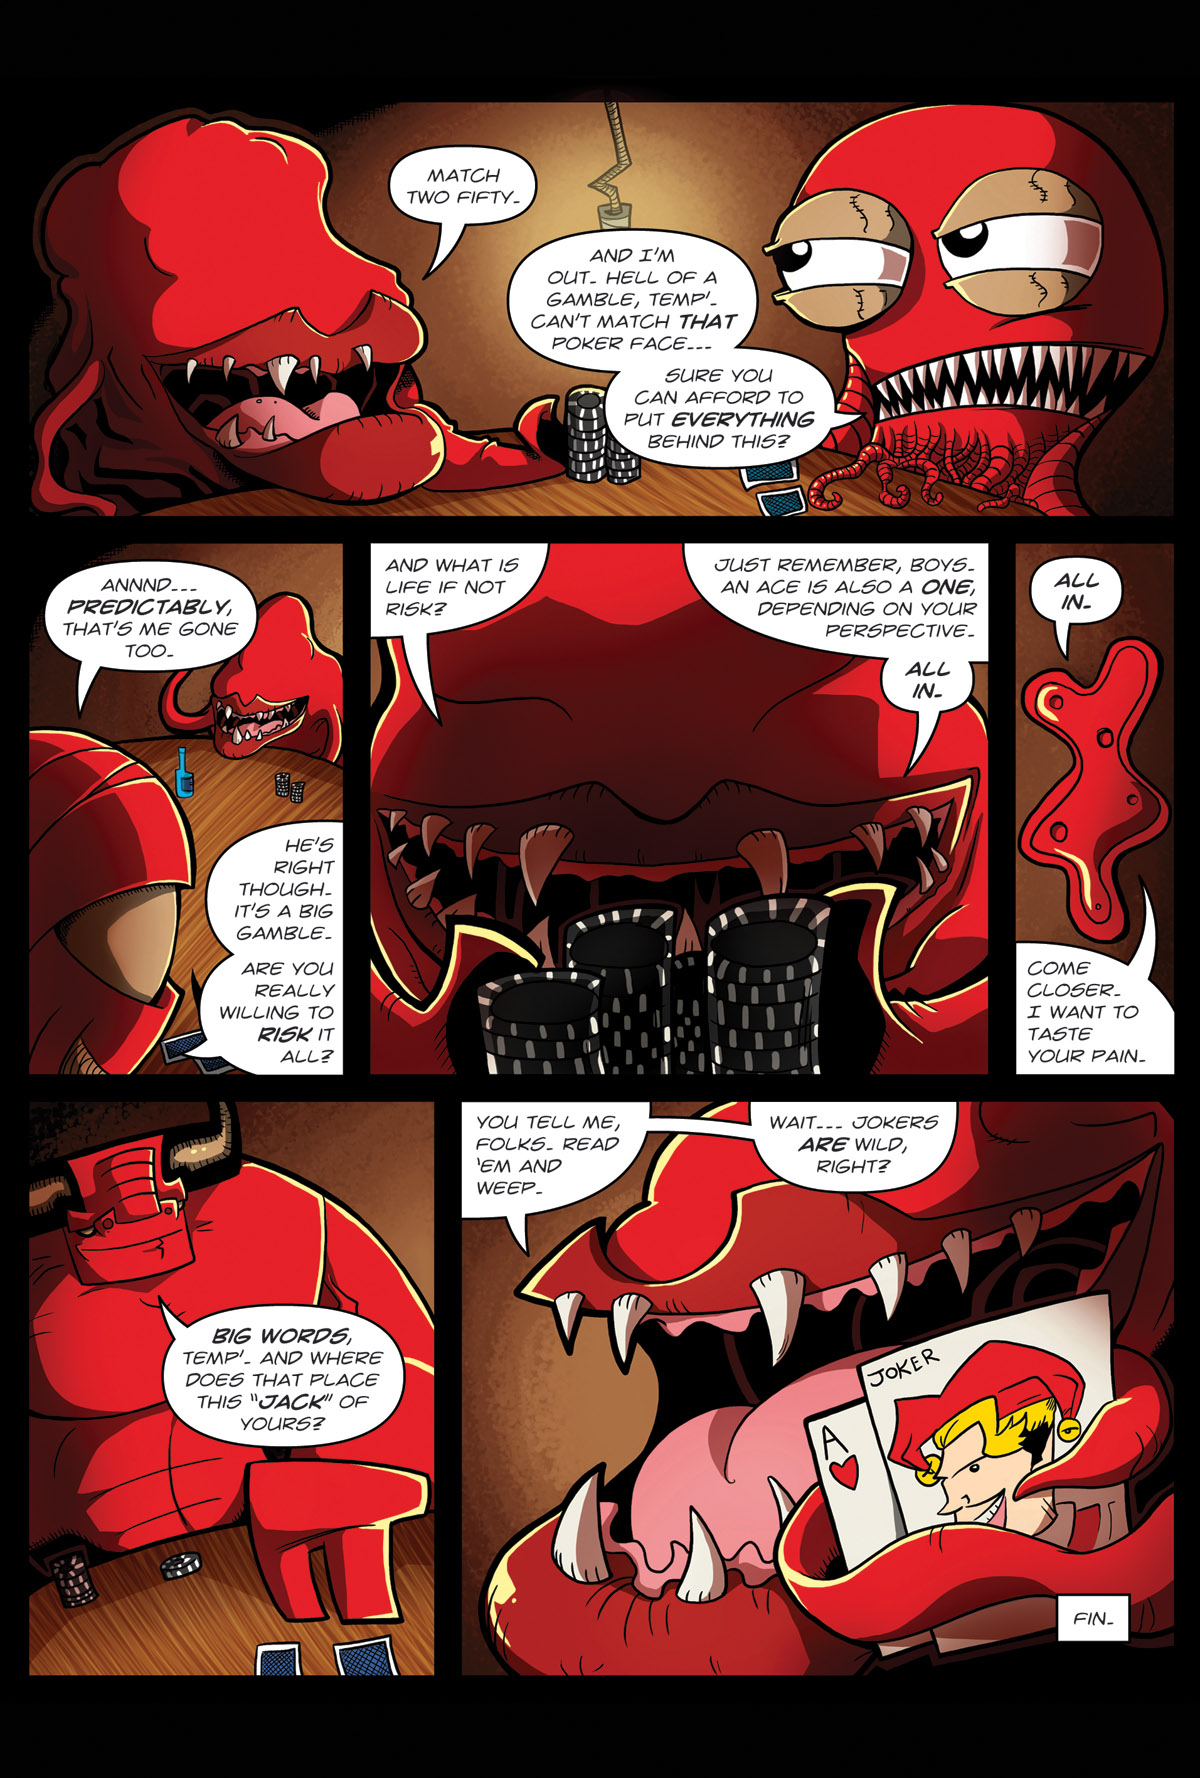 Afterlife Inc. | Dead Days | Temperance | Page 4